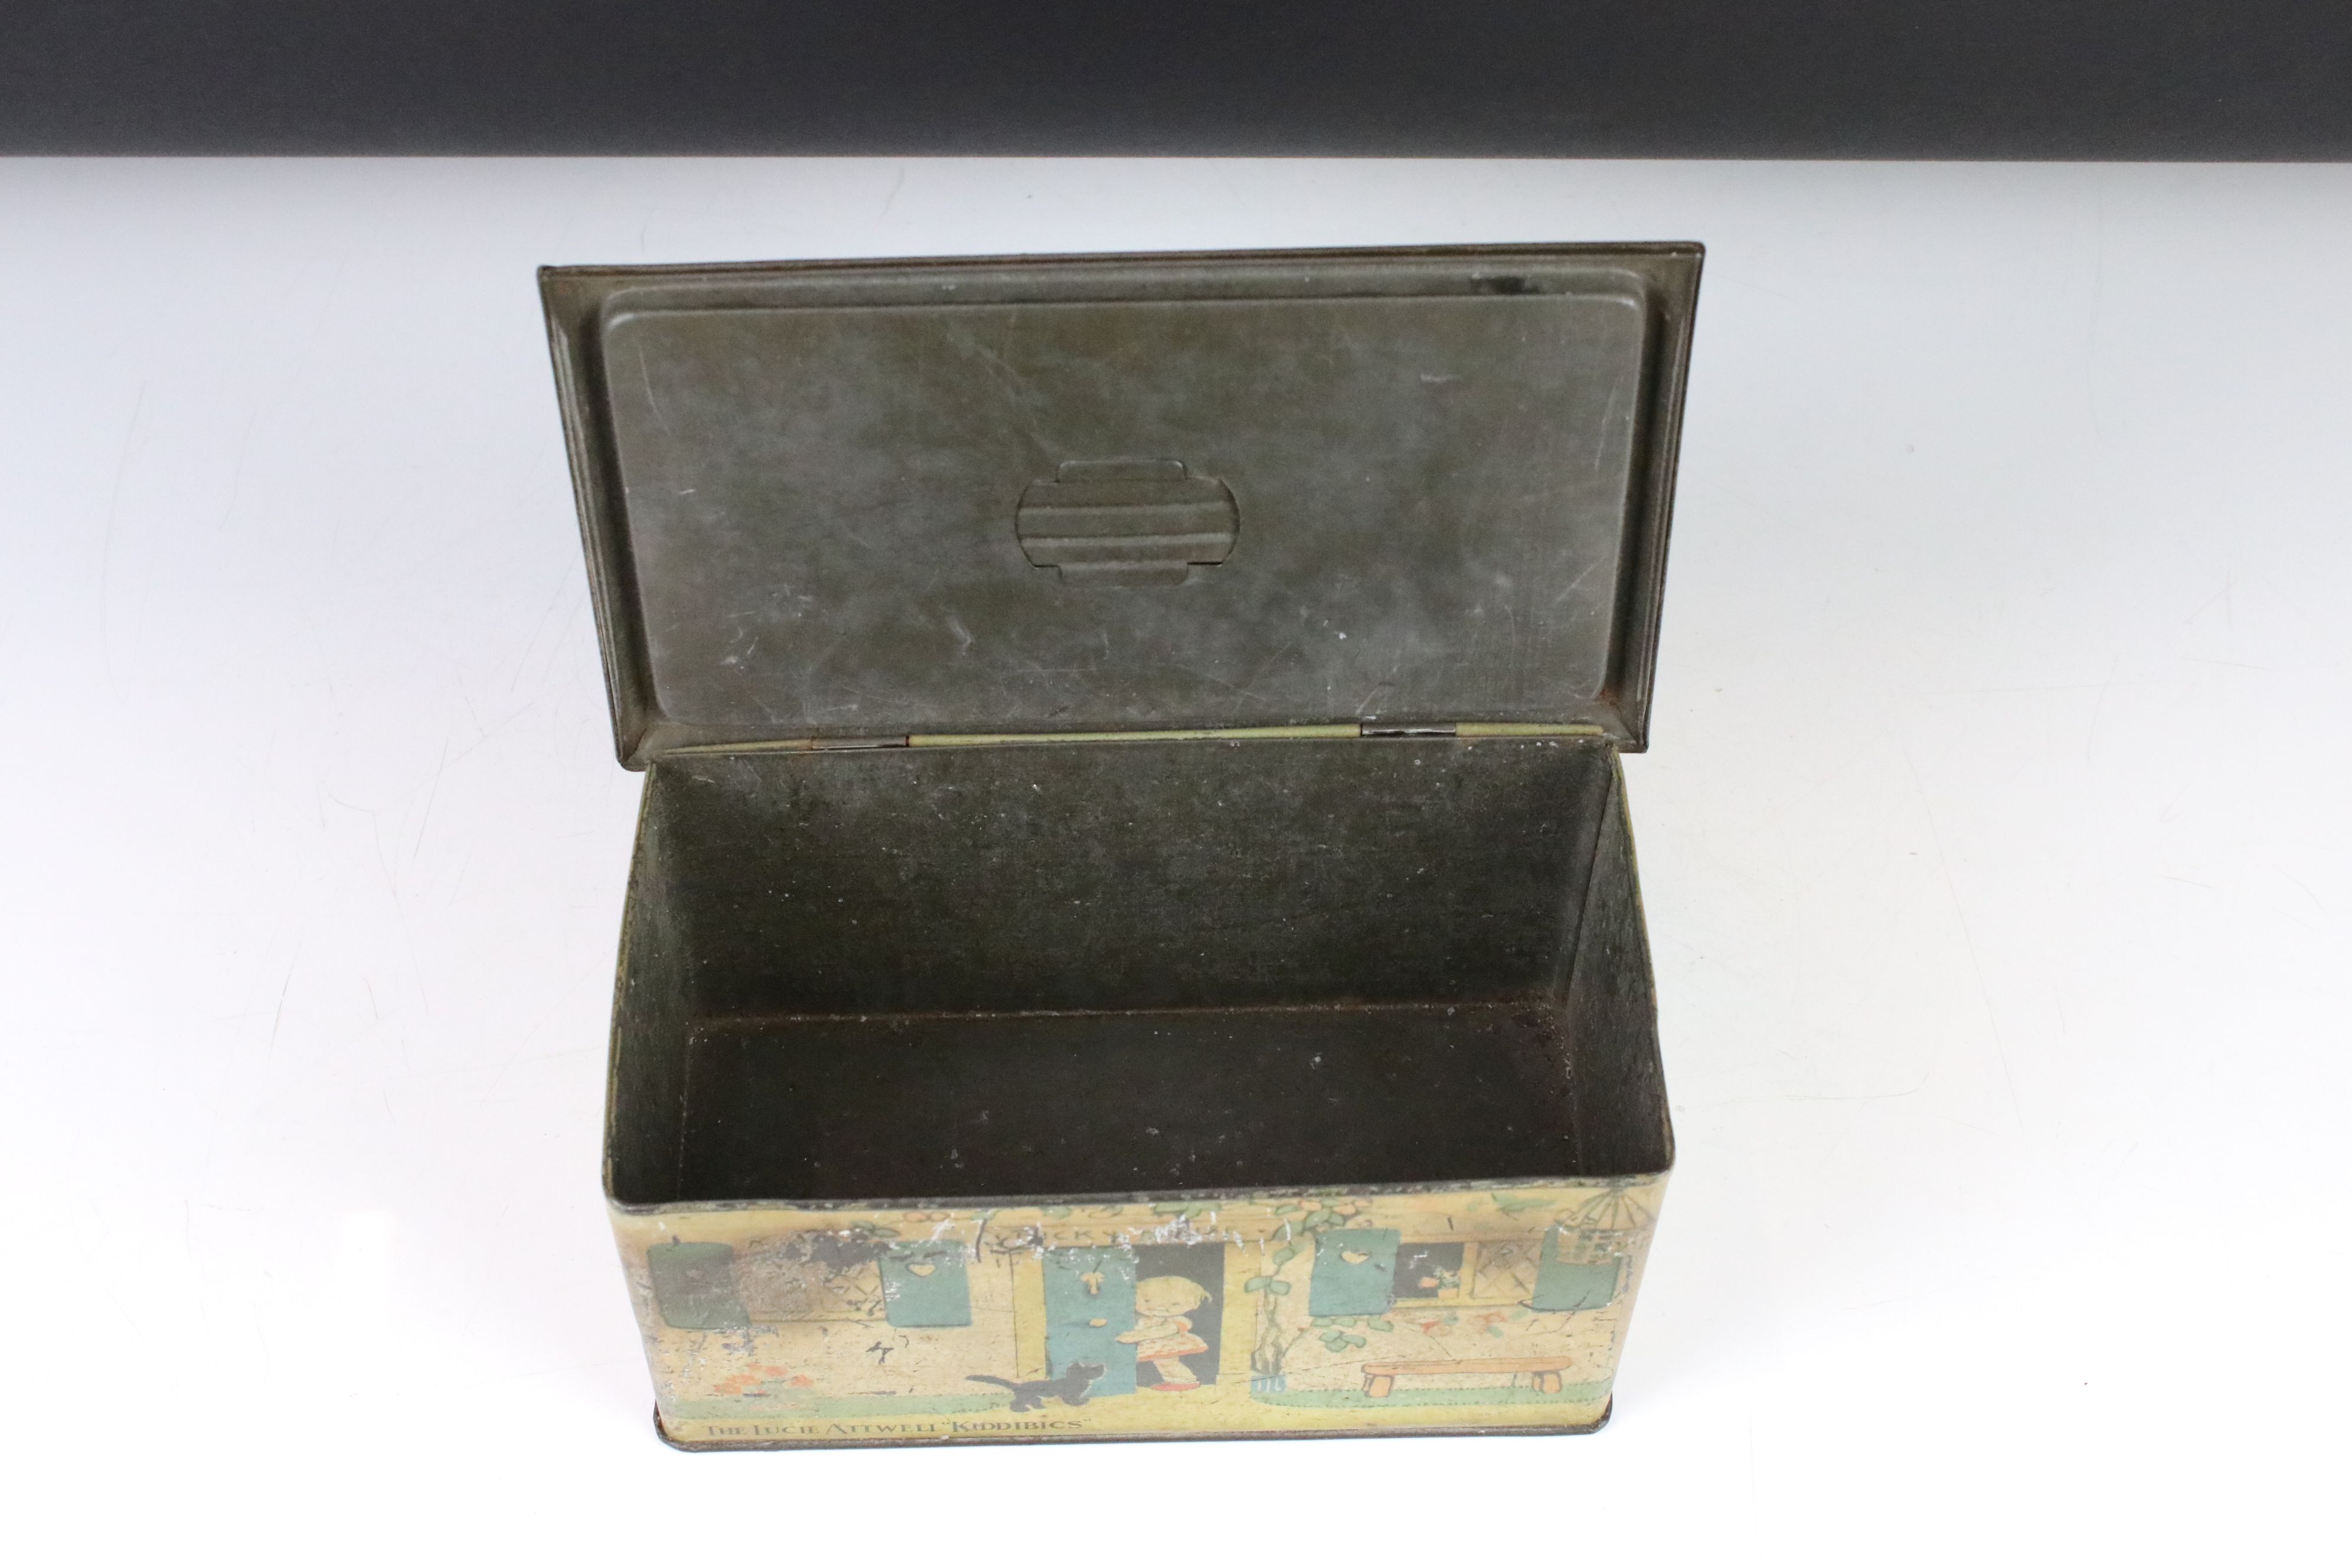 William Crawford & Sons "The Lucie Attwell Kiddibics" biscuit tin moneybox, approx 20.5cm wide - Image 3 of 4